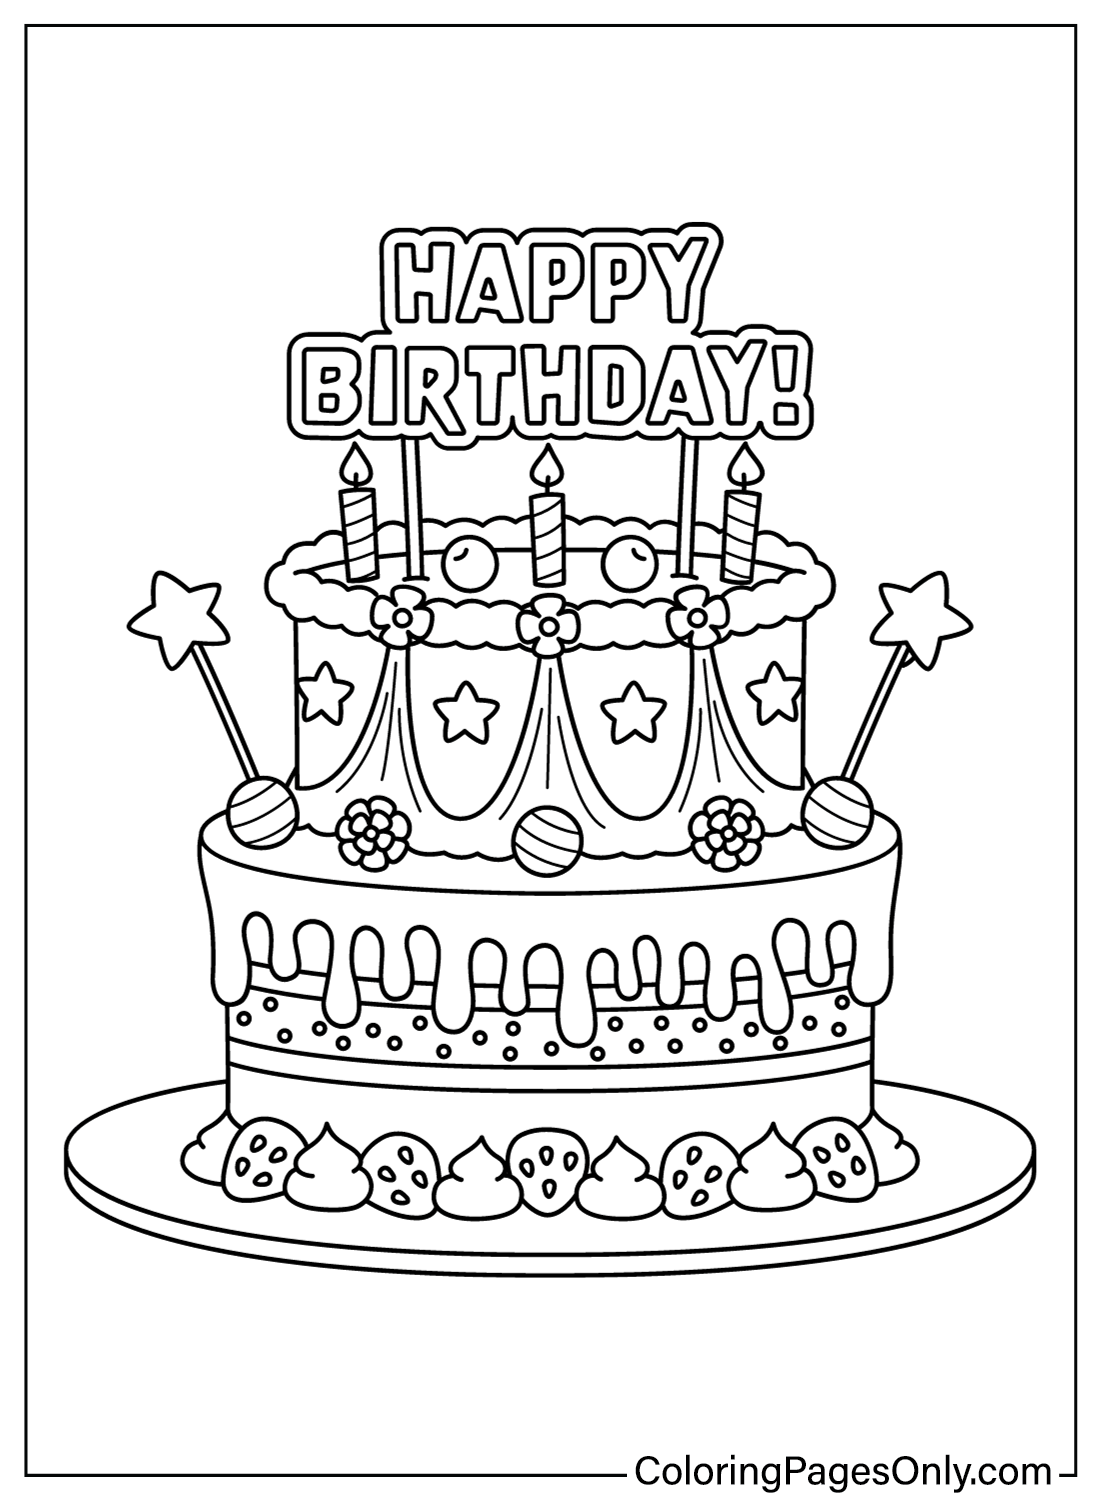 Free Birthday Cake Coloring Pages